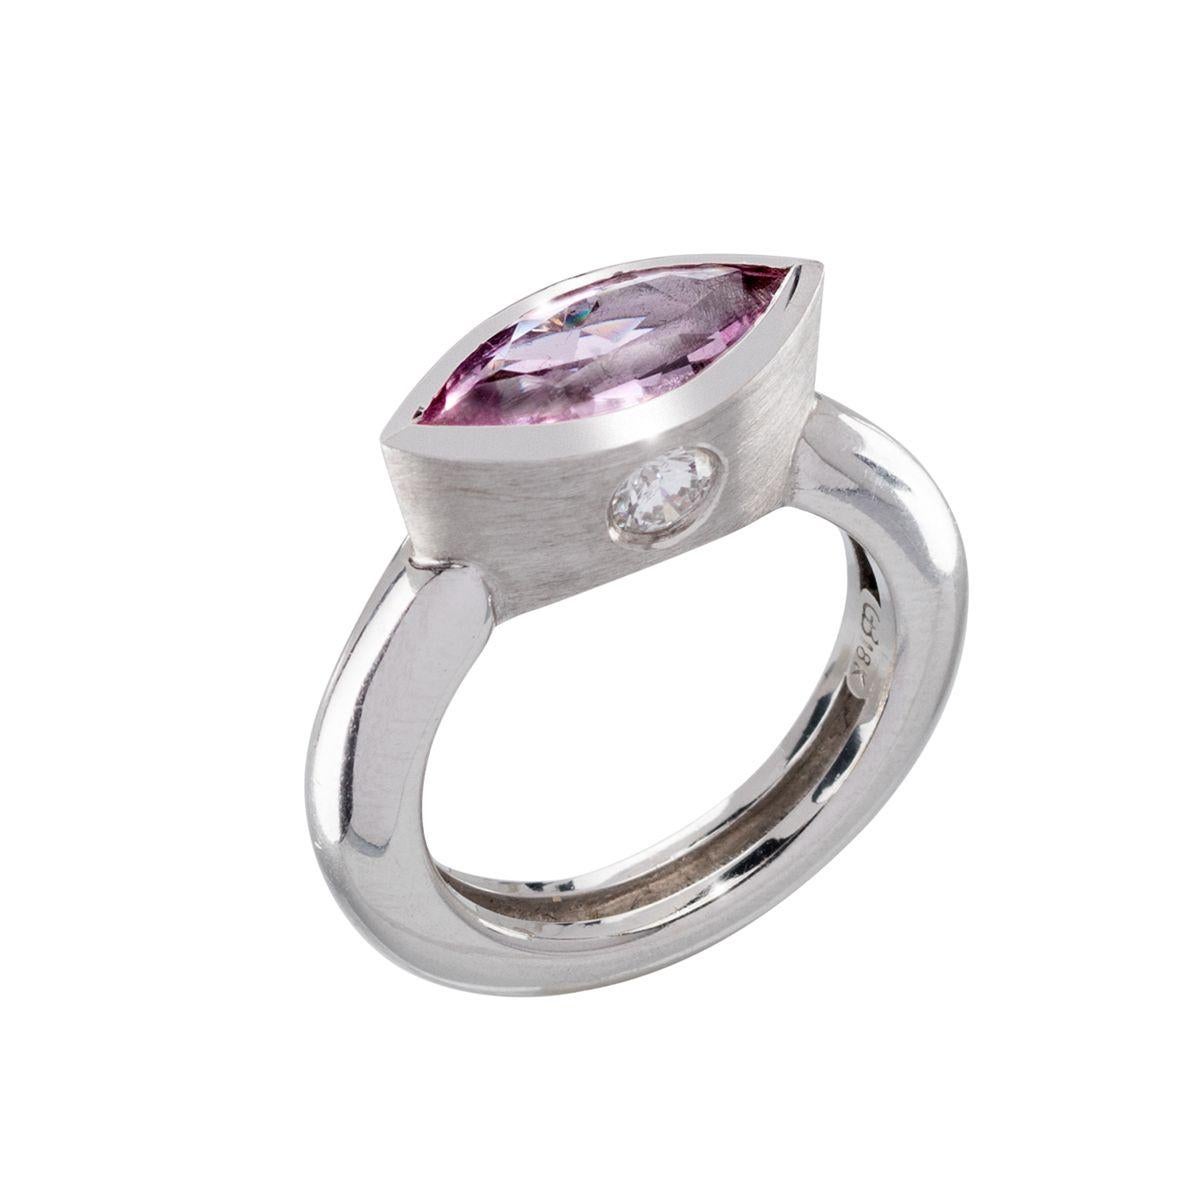 Bezel set in 18k white gold with diamond inlays, the pretty pink marquise sapphire is an everyday classic ring that remains timeless and can be worn for any occasion.

Weight: 
Pink Natural Sapphire - 1.62 carats
Diamonds - 0.30 carats